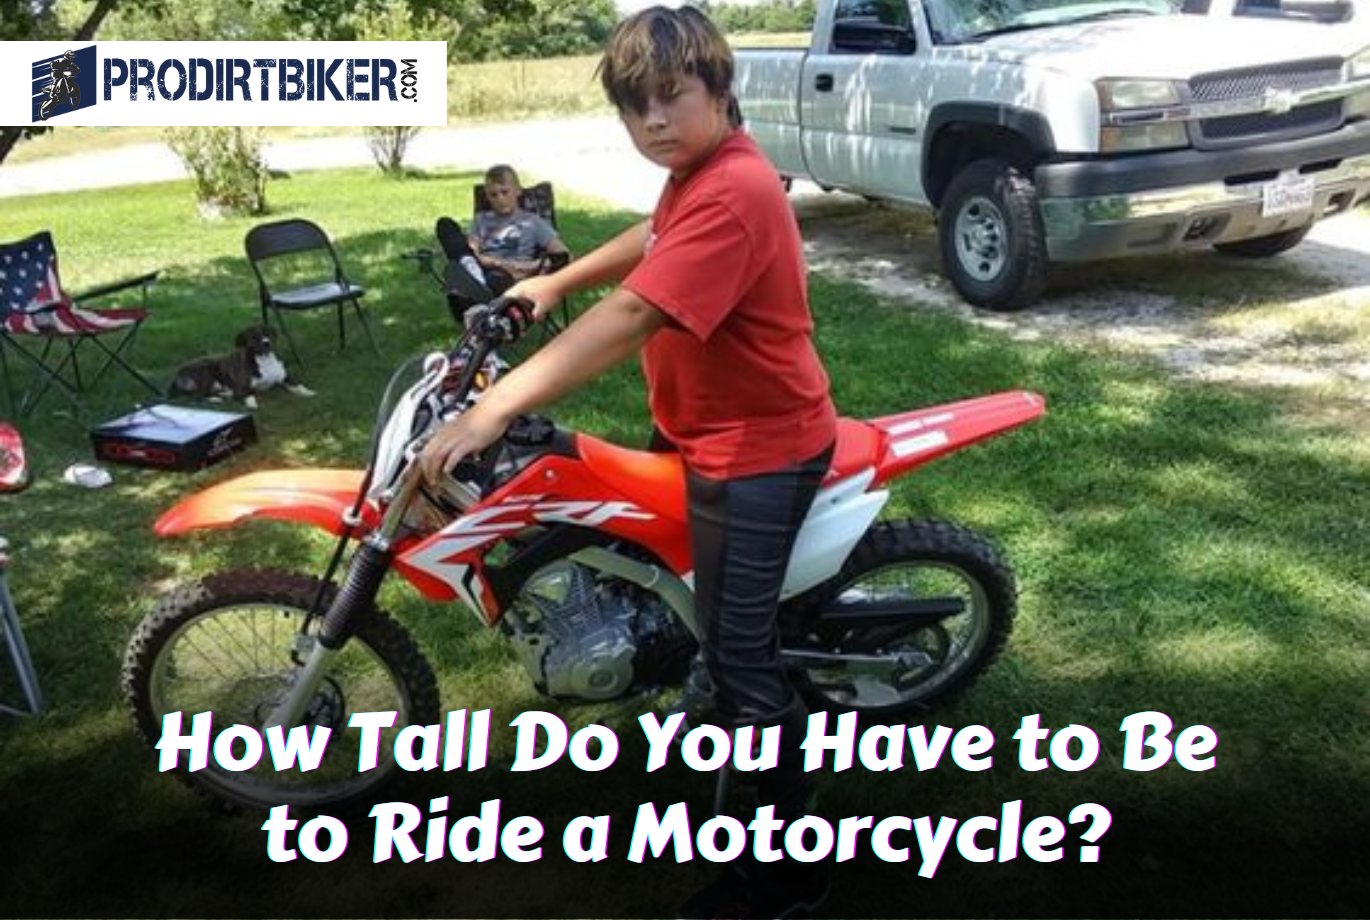 How Tall Do You Have to Be to Ride a Motorcycle?